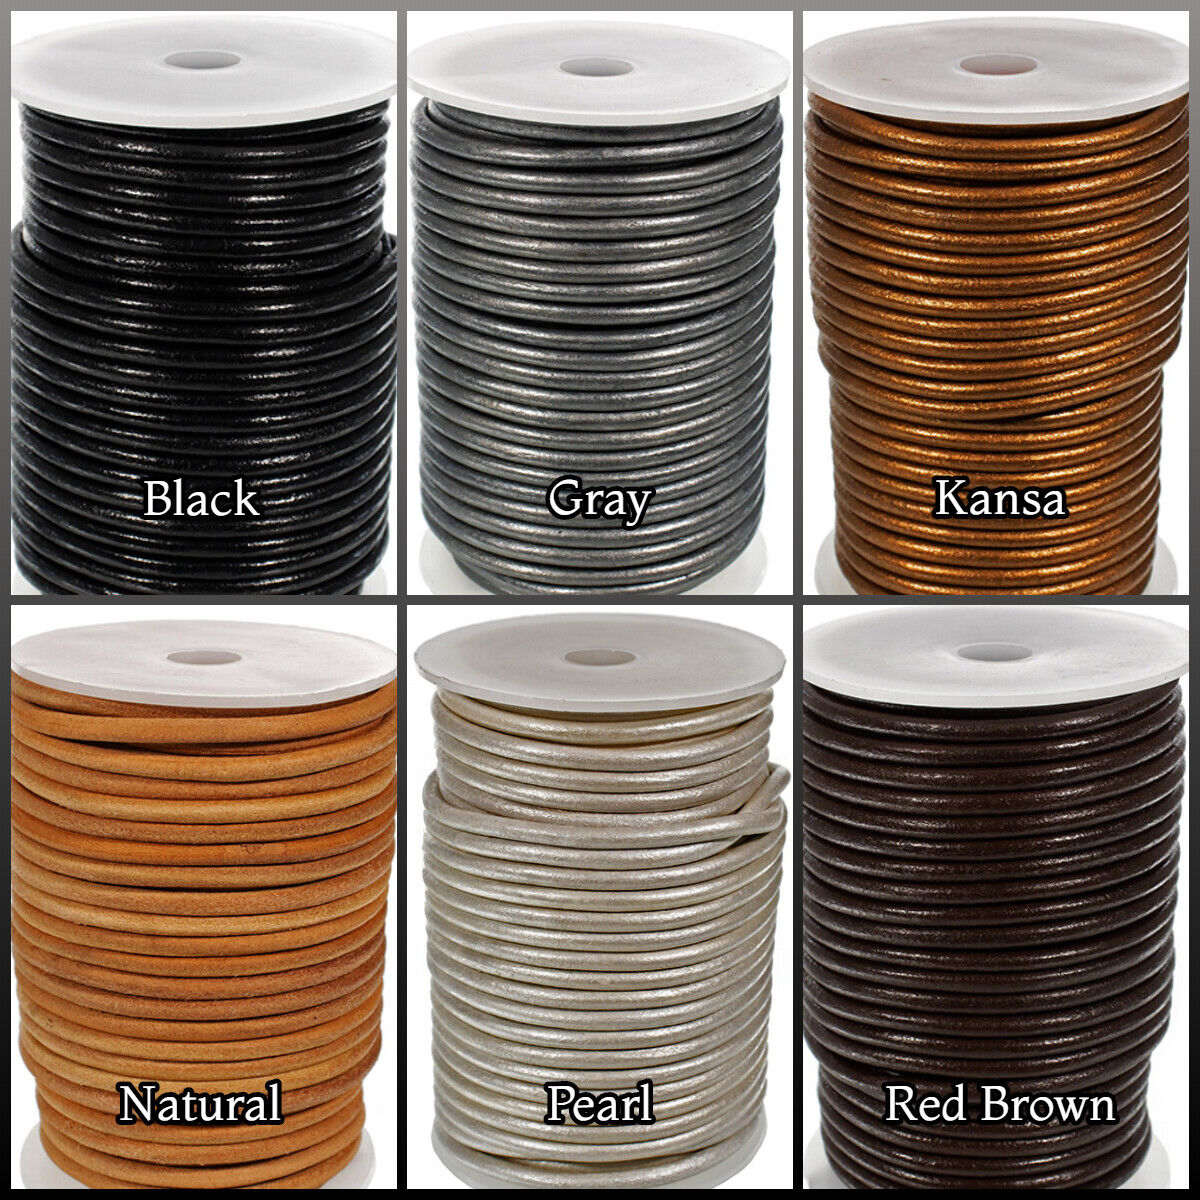 Round Leather Cord By Craft County - In 4mm, 5mm, & 6mm Sizes - 6 Color Options